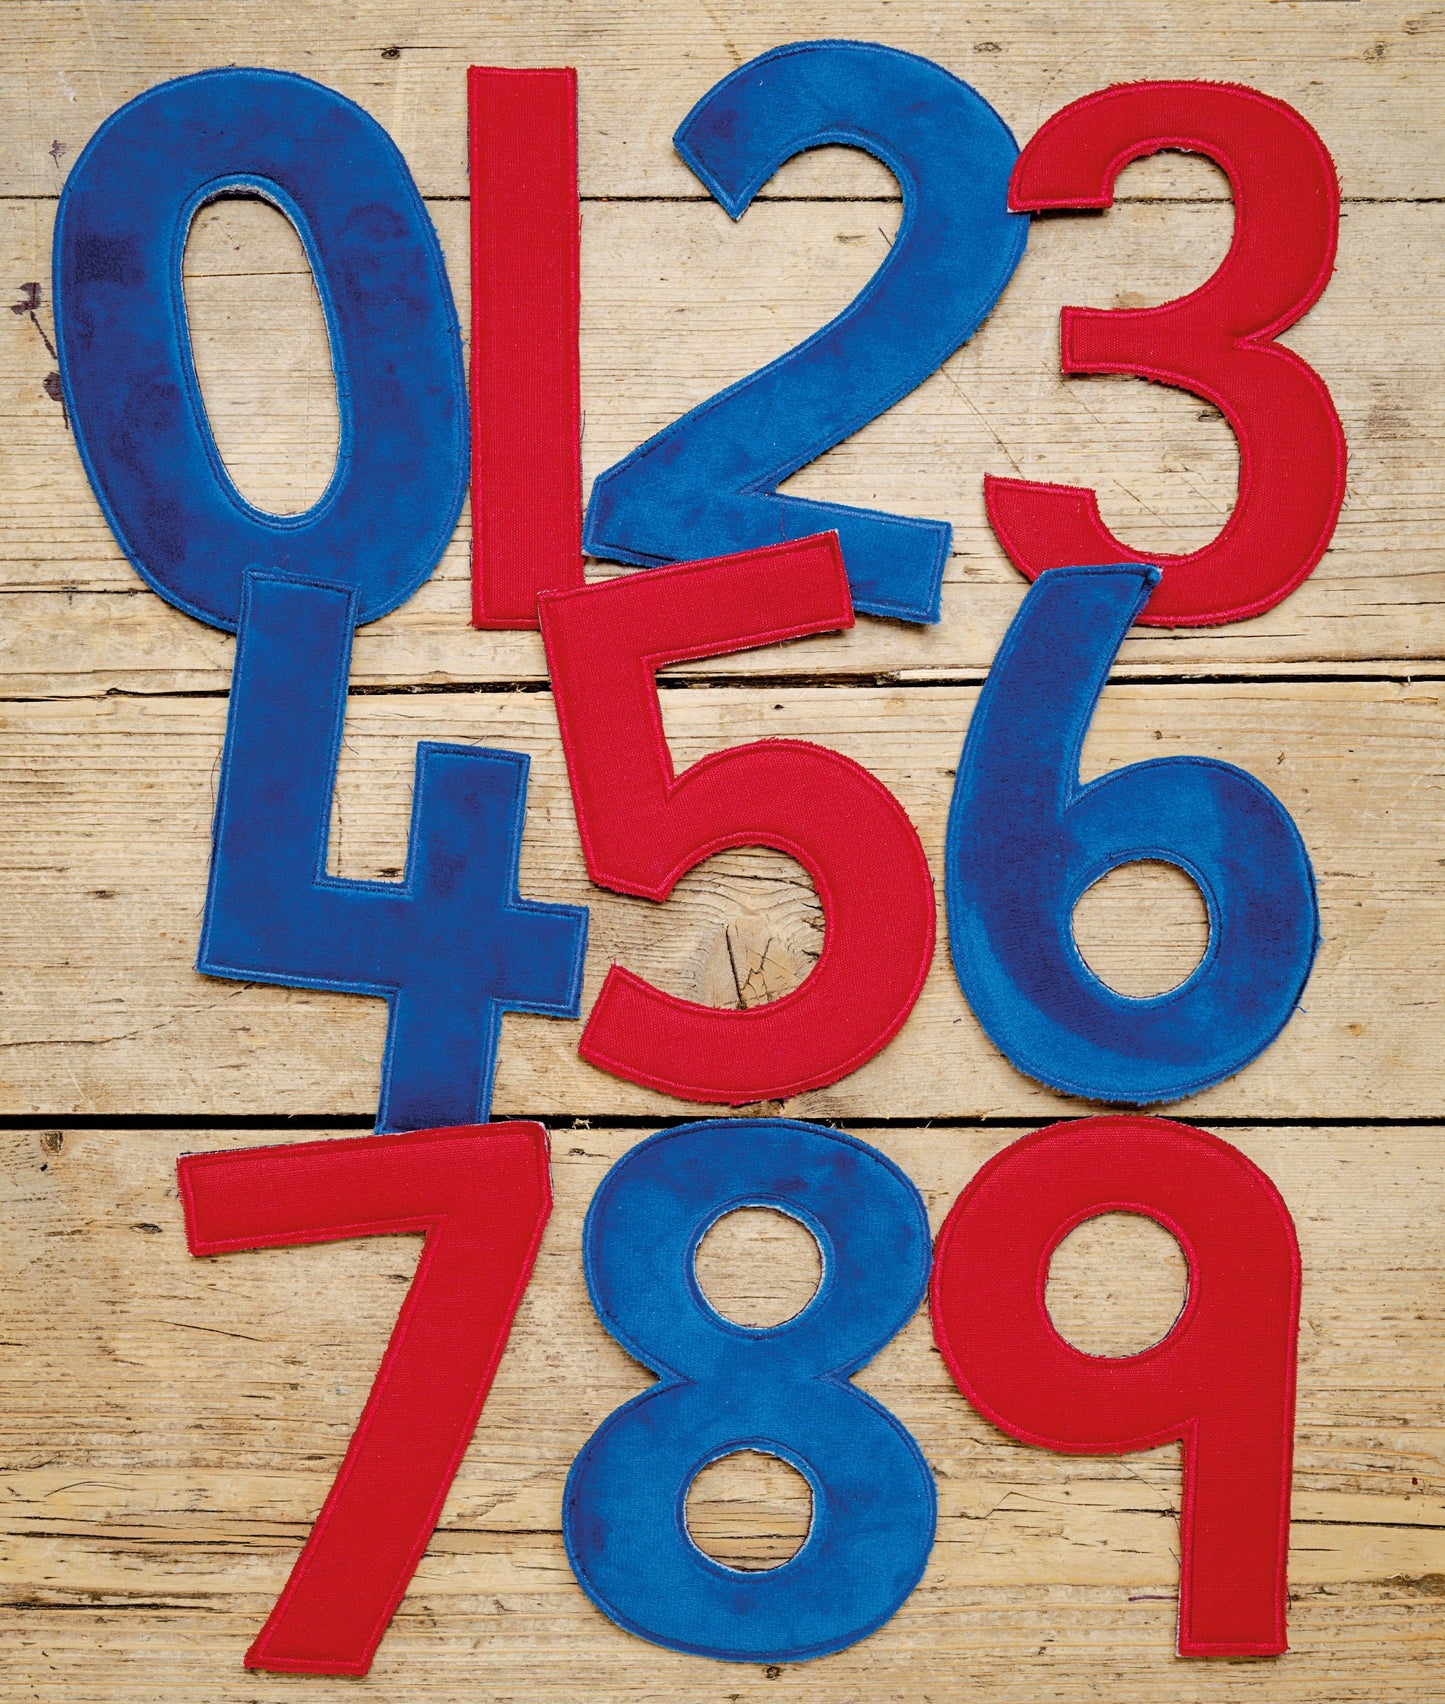 Feely Fabric Numbers | Learning and Exploring Through Play